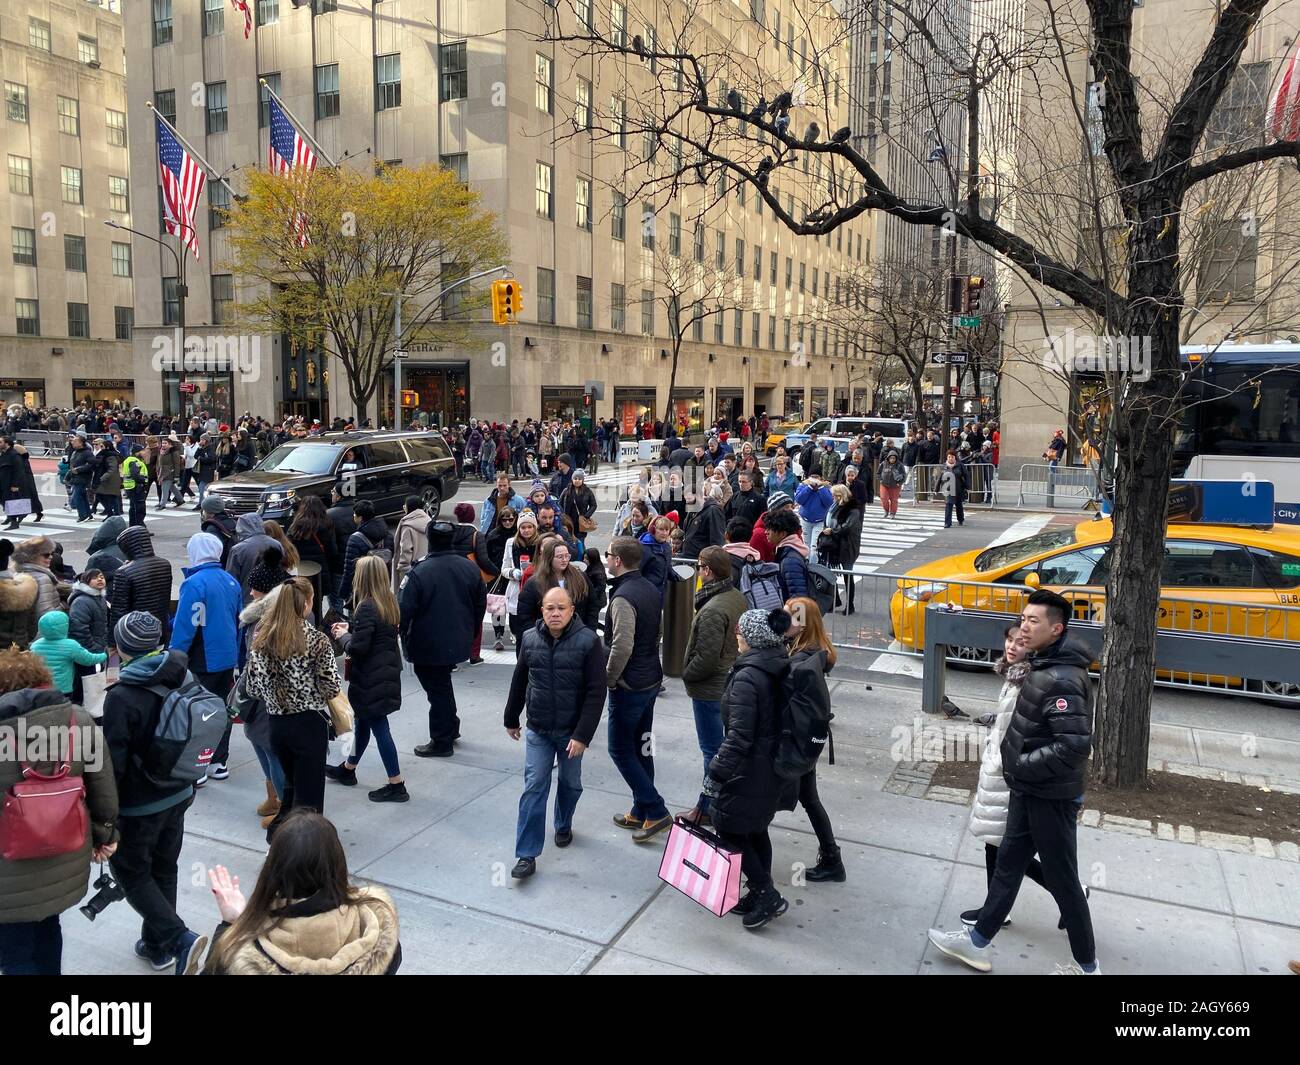 Crowds of tourists & New Yorkers kick off the holiday season on 'Black Friday' on 5th Avenue at 50th Street by Rockefeller Center in midtown Manhattan Stock Photo